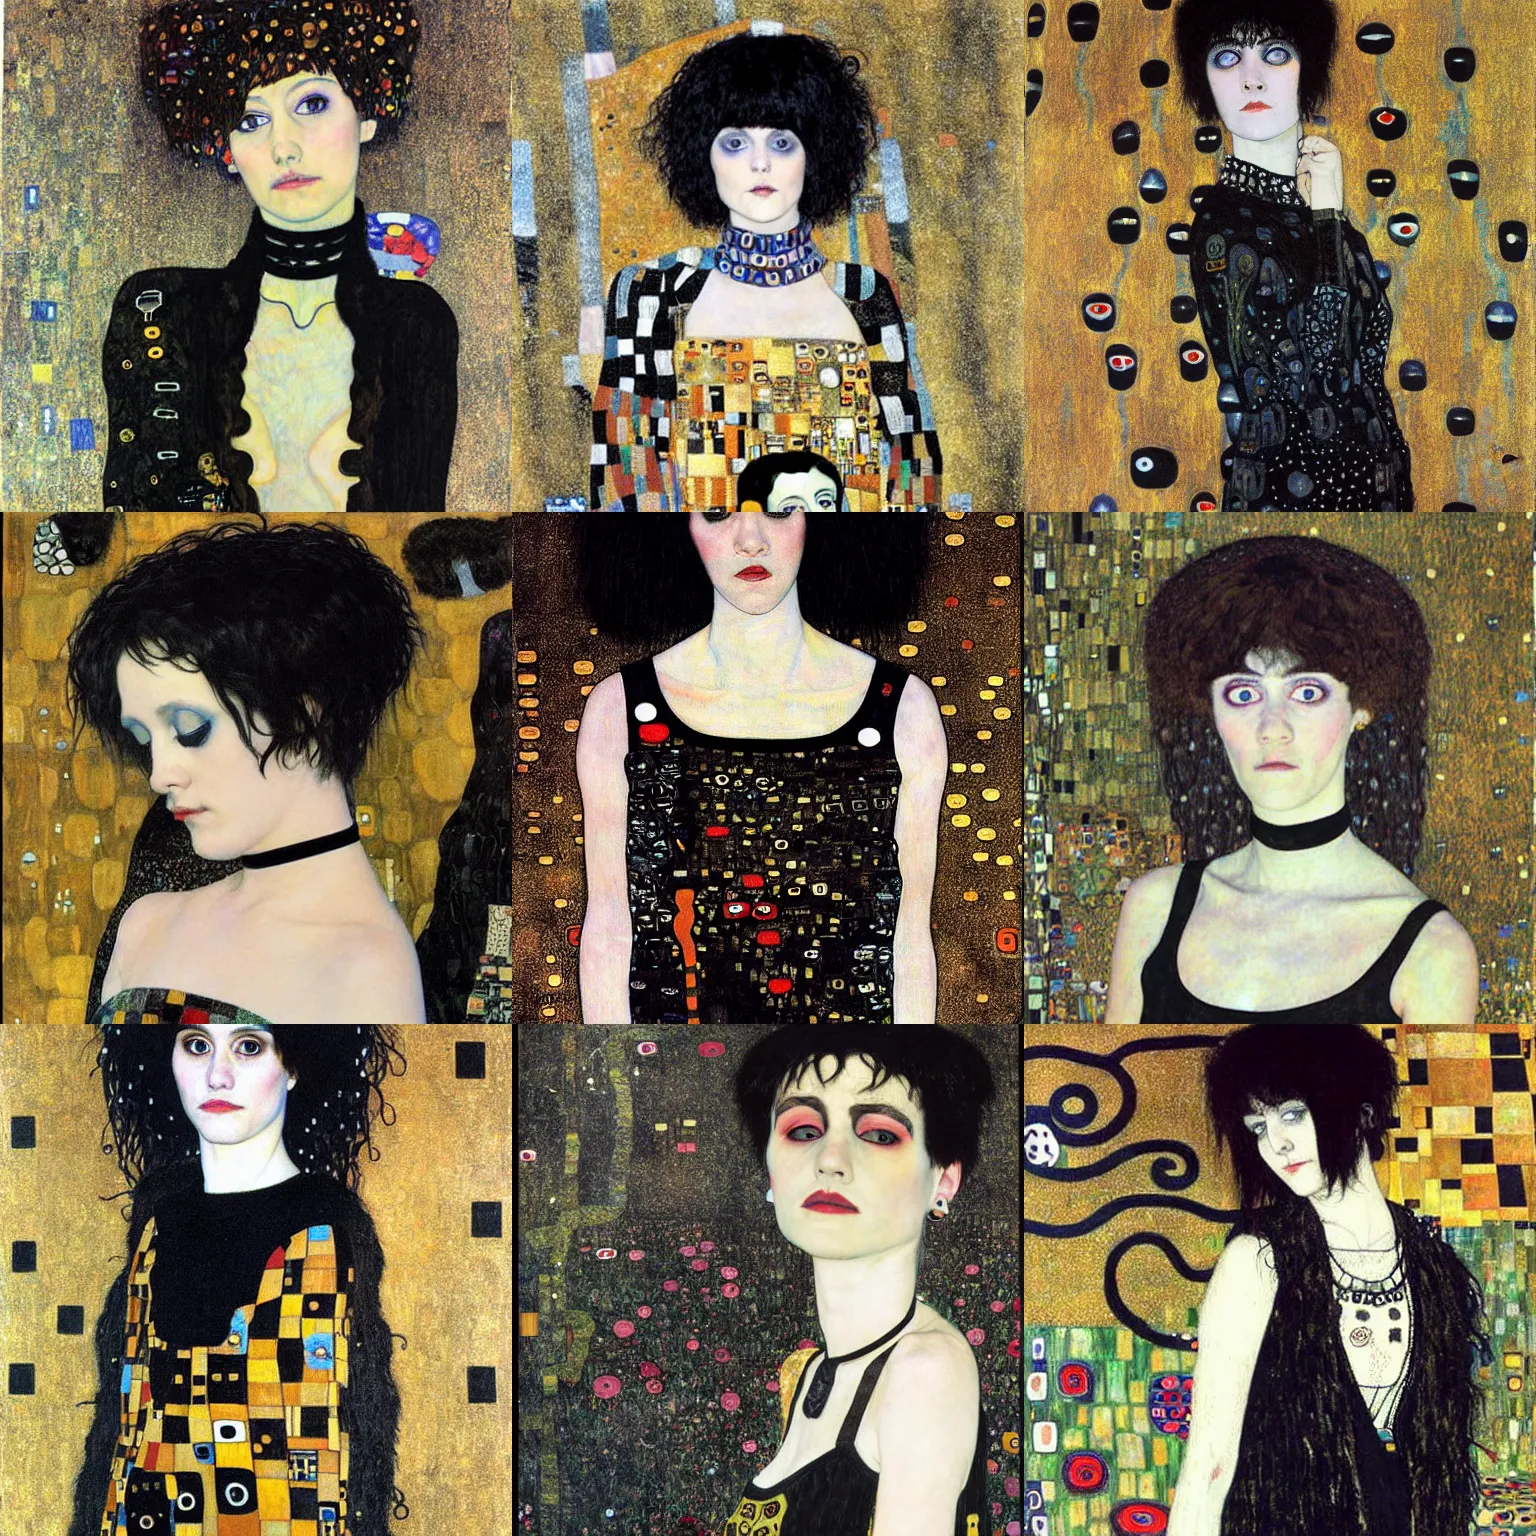 Prompt: an emo painted by gustav klimt. her hair is dark brown and cut into a short, messy pixie cut. she has large entirely - black evil eyes. she is wearing a black tank top, a black leather jacket, a black knee - length skirt, a black choker, and black leather boots.